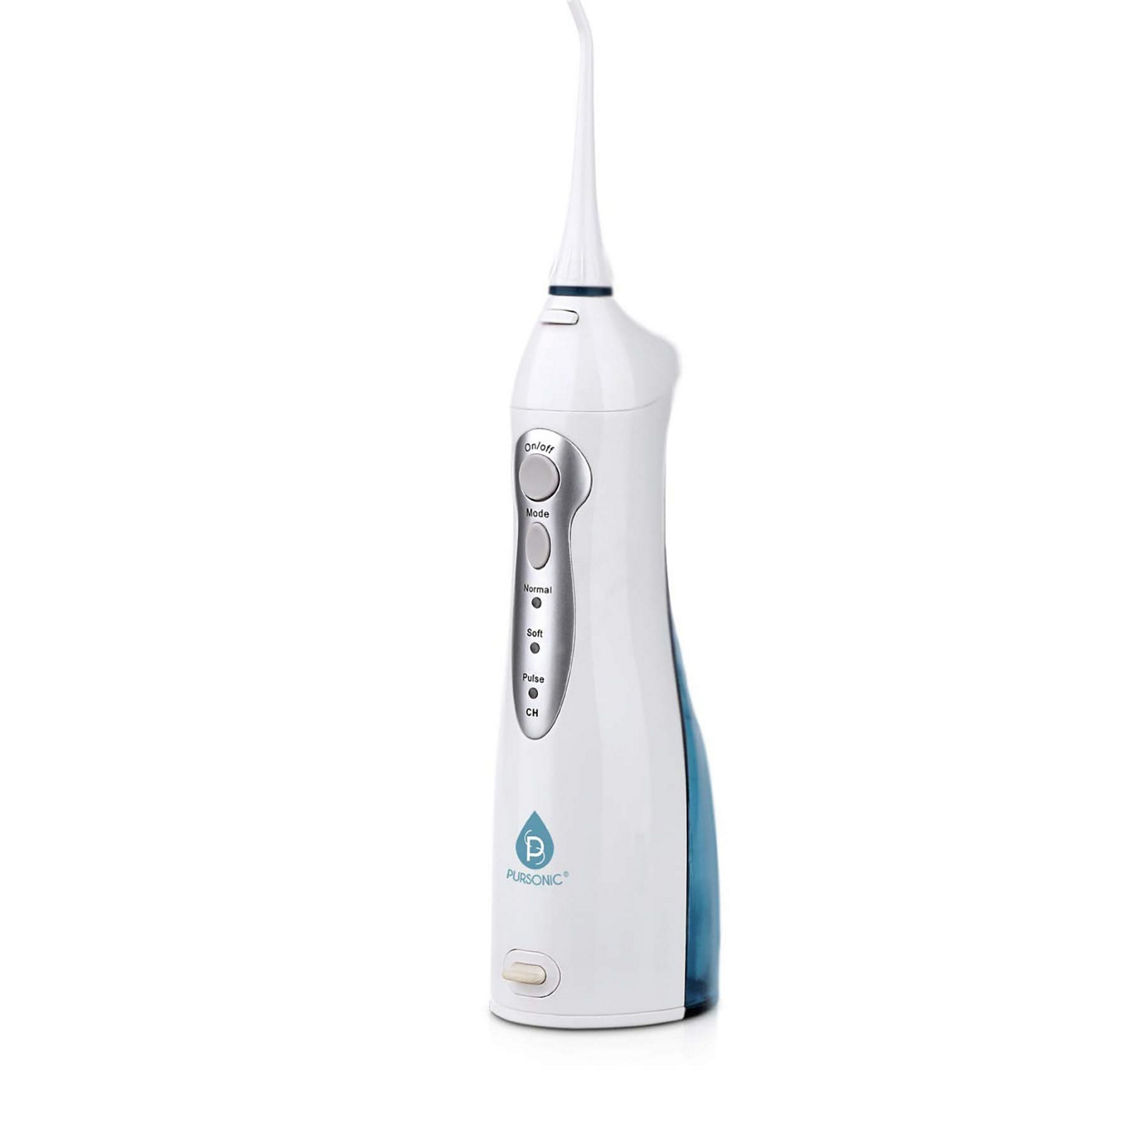 PURSONIC USB Rechargeable Oral Irrigator - Image 2 of 2